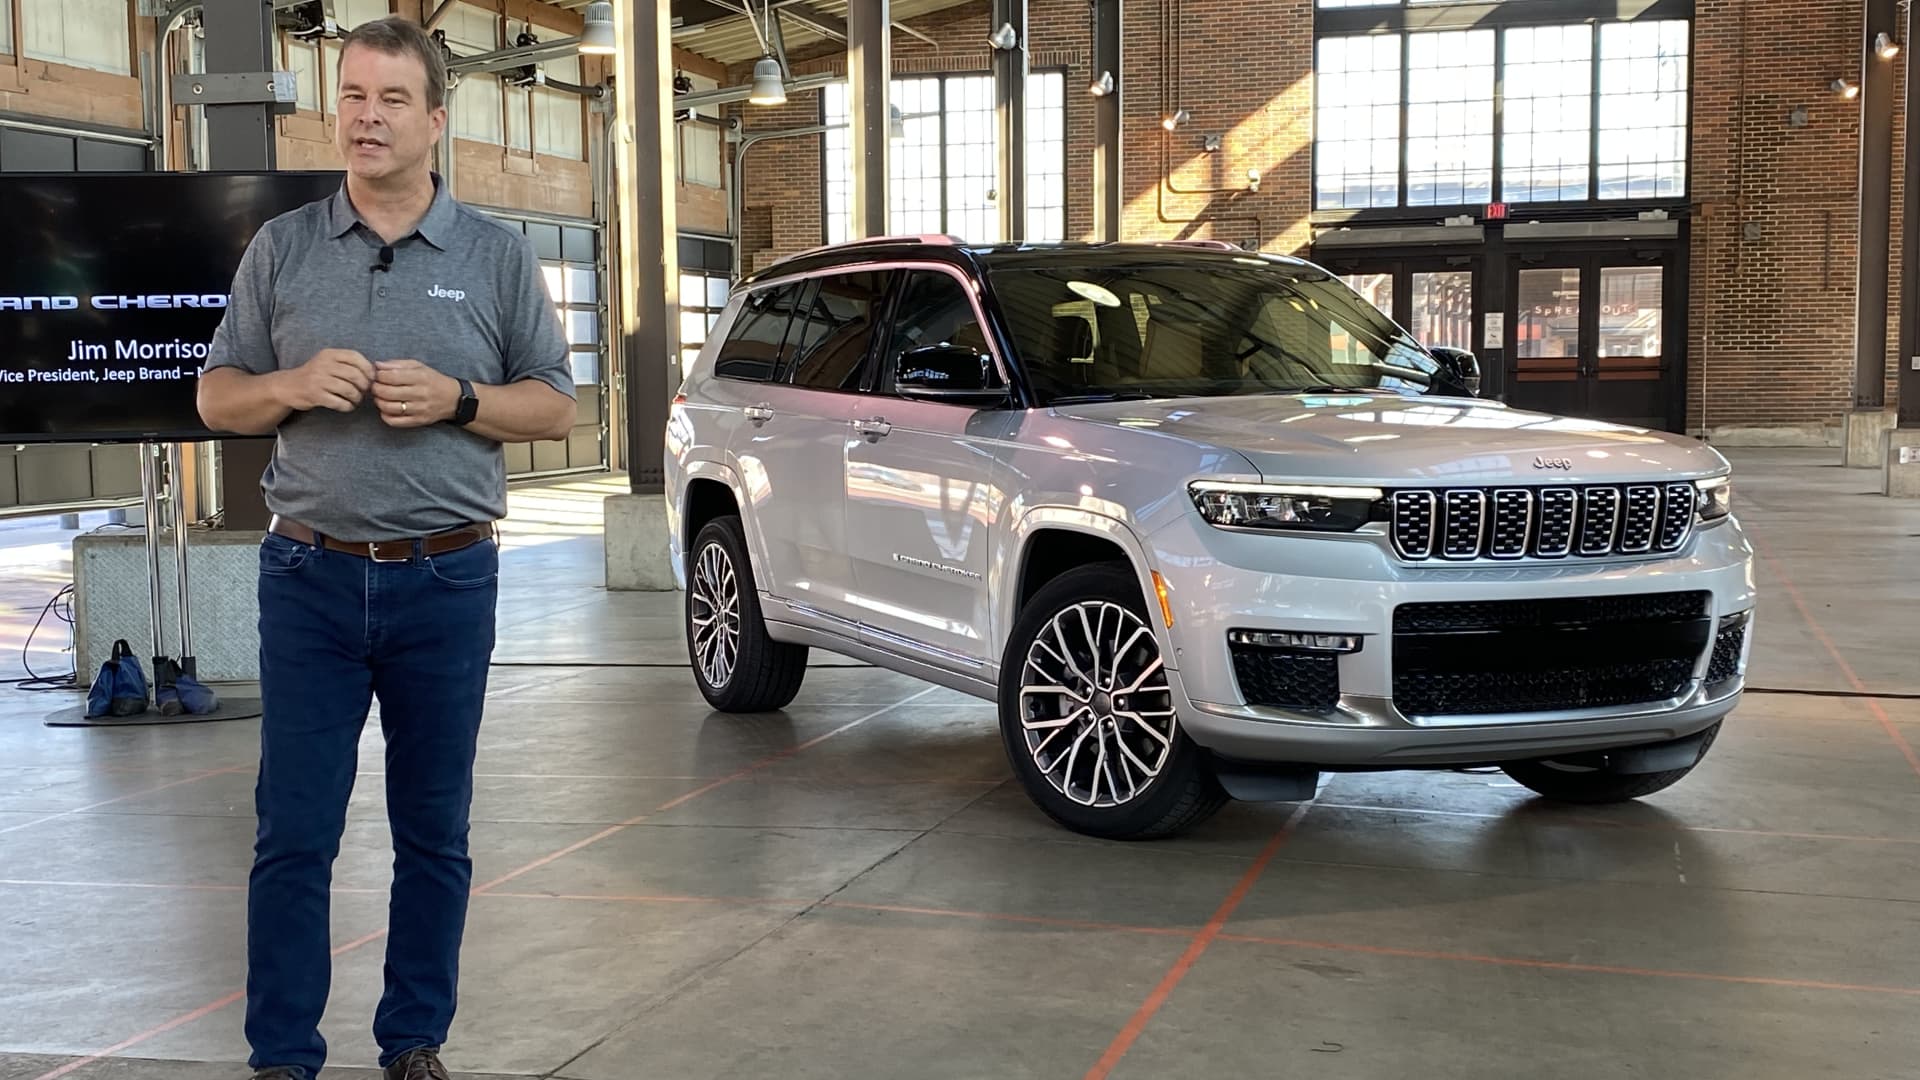 Jim Morrison, vice president of Jeep in North America, speaks June 11, 2021 during an event for the new Grand Cherokee L SUV in Detroit.